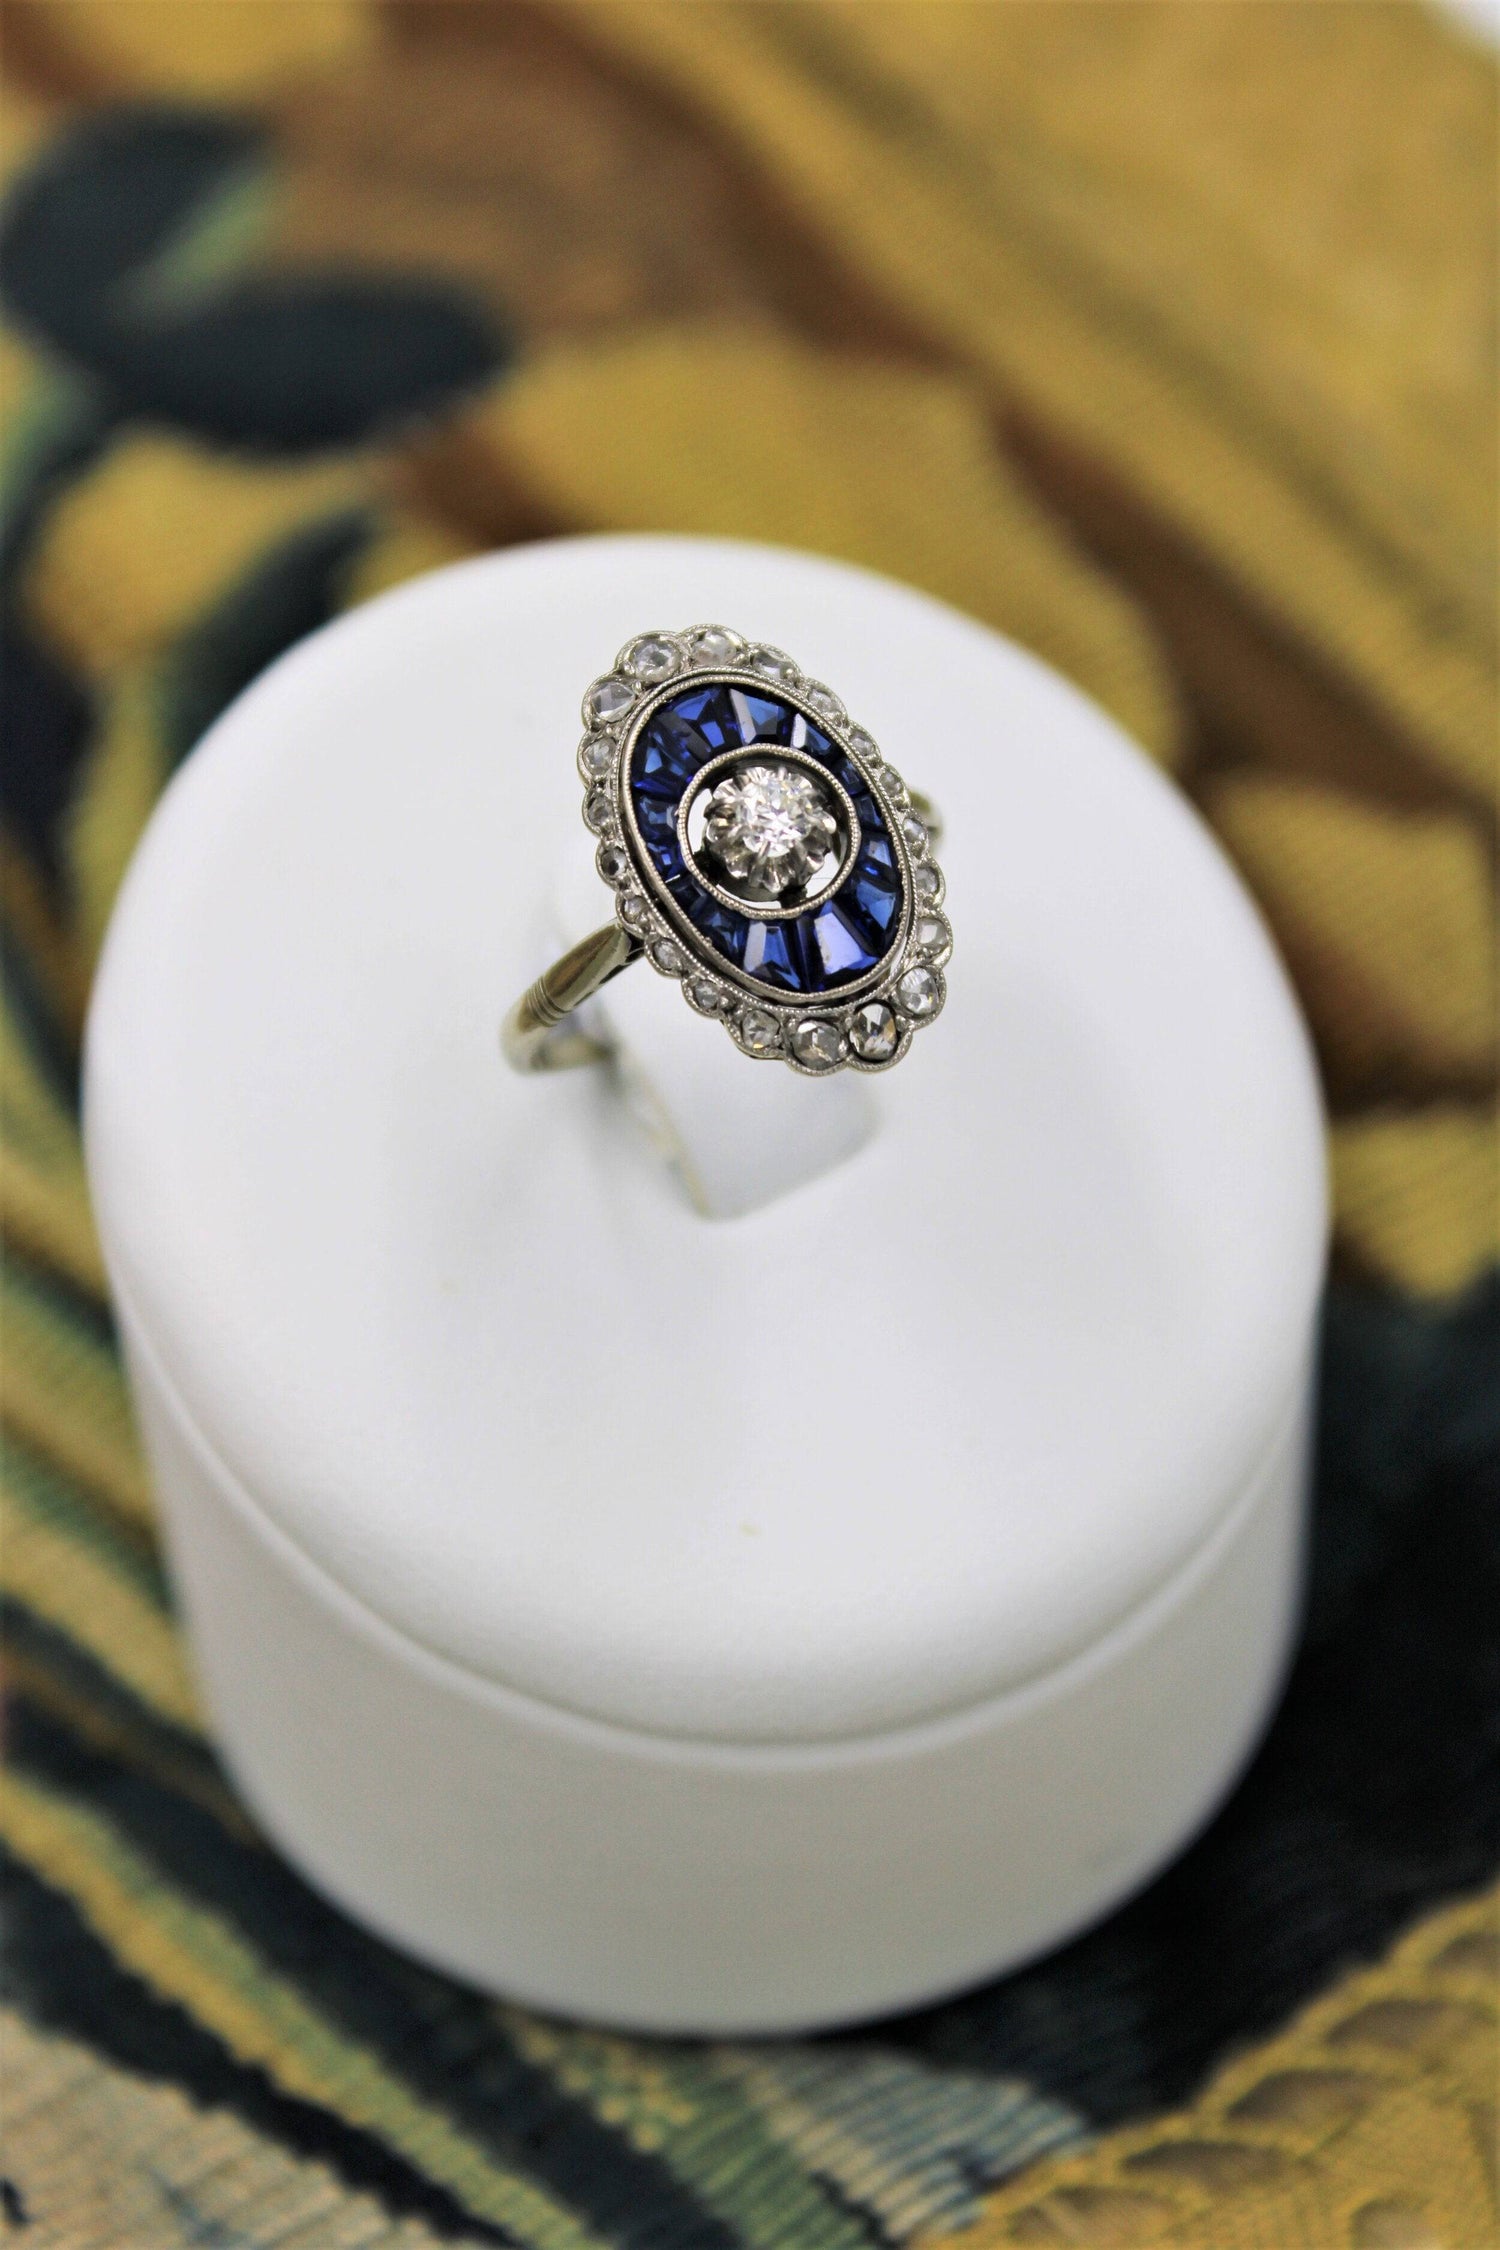 A very fine Art Deco Diamond and Sapphire Floating Ring set in 18ct Yellow Gold & Platinum, French, Circa 1930 - Robin Haydock Antiques